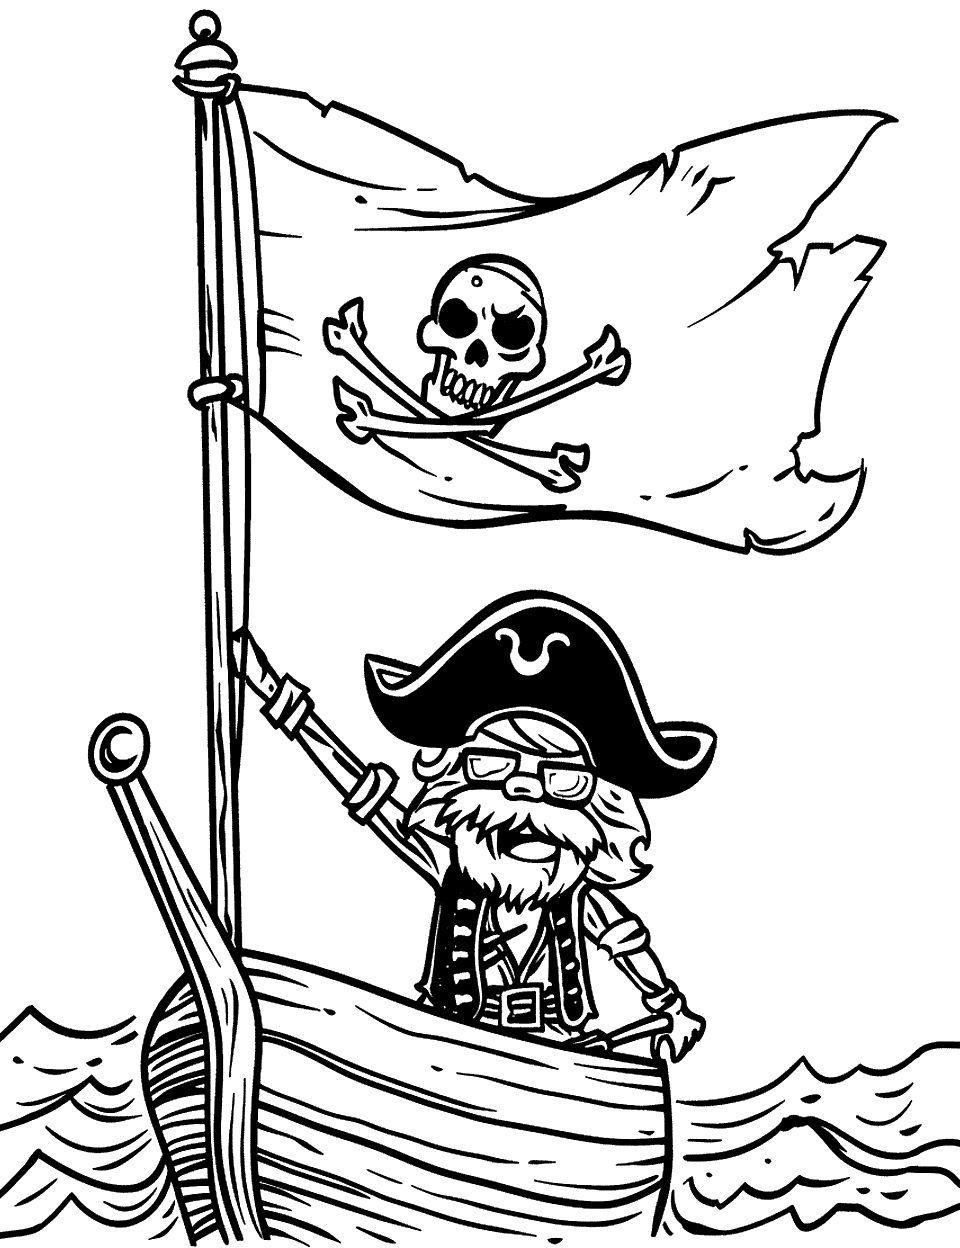 Jolly Roger Flag Pirate Coloring Page - A pirate flag waving in the wind atop a small boat.